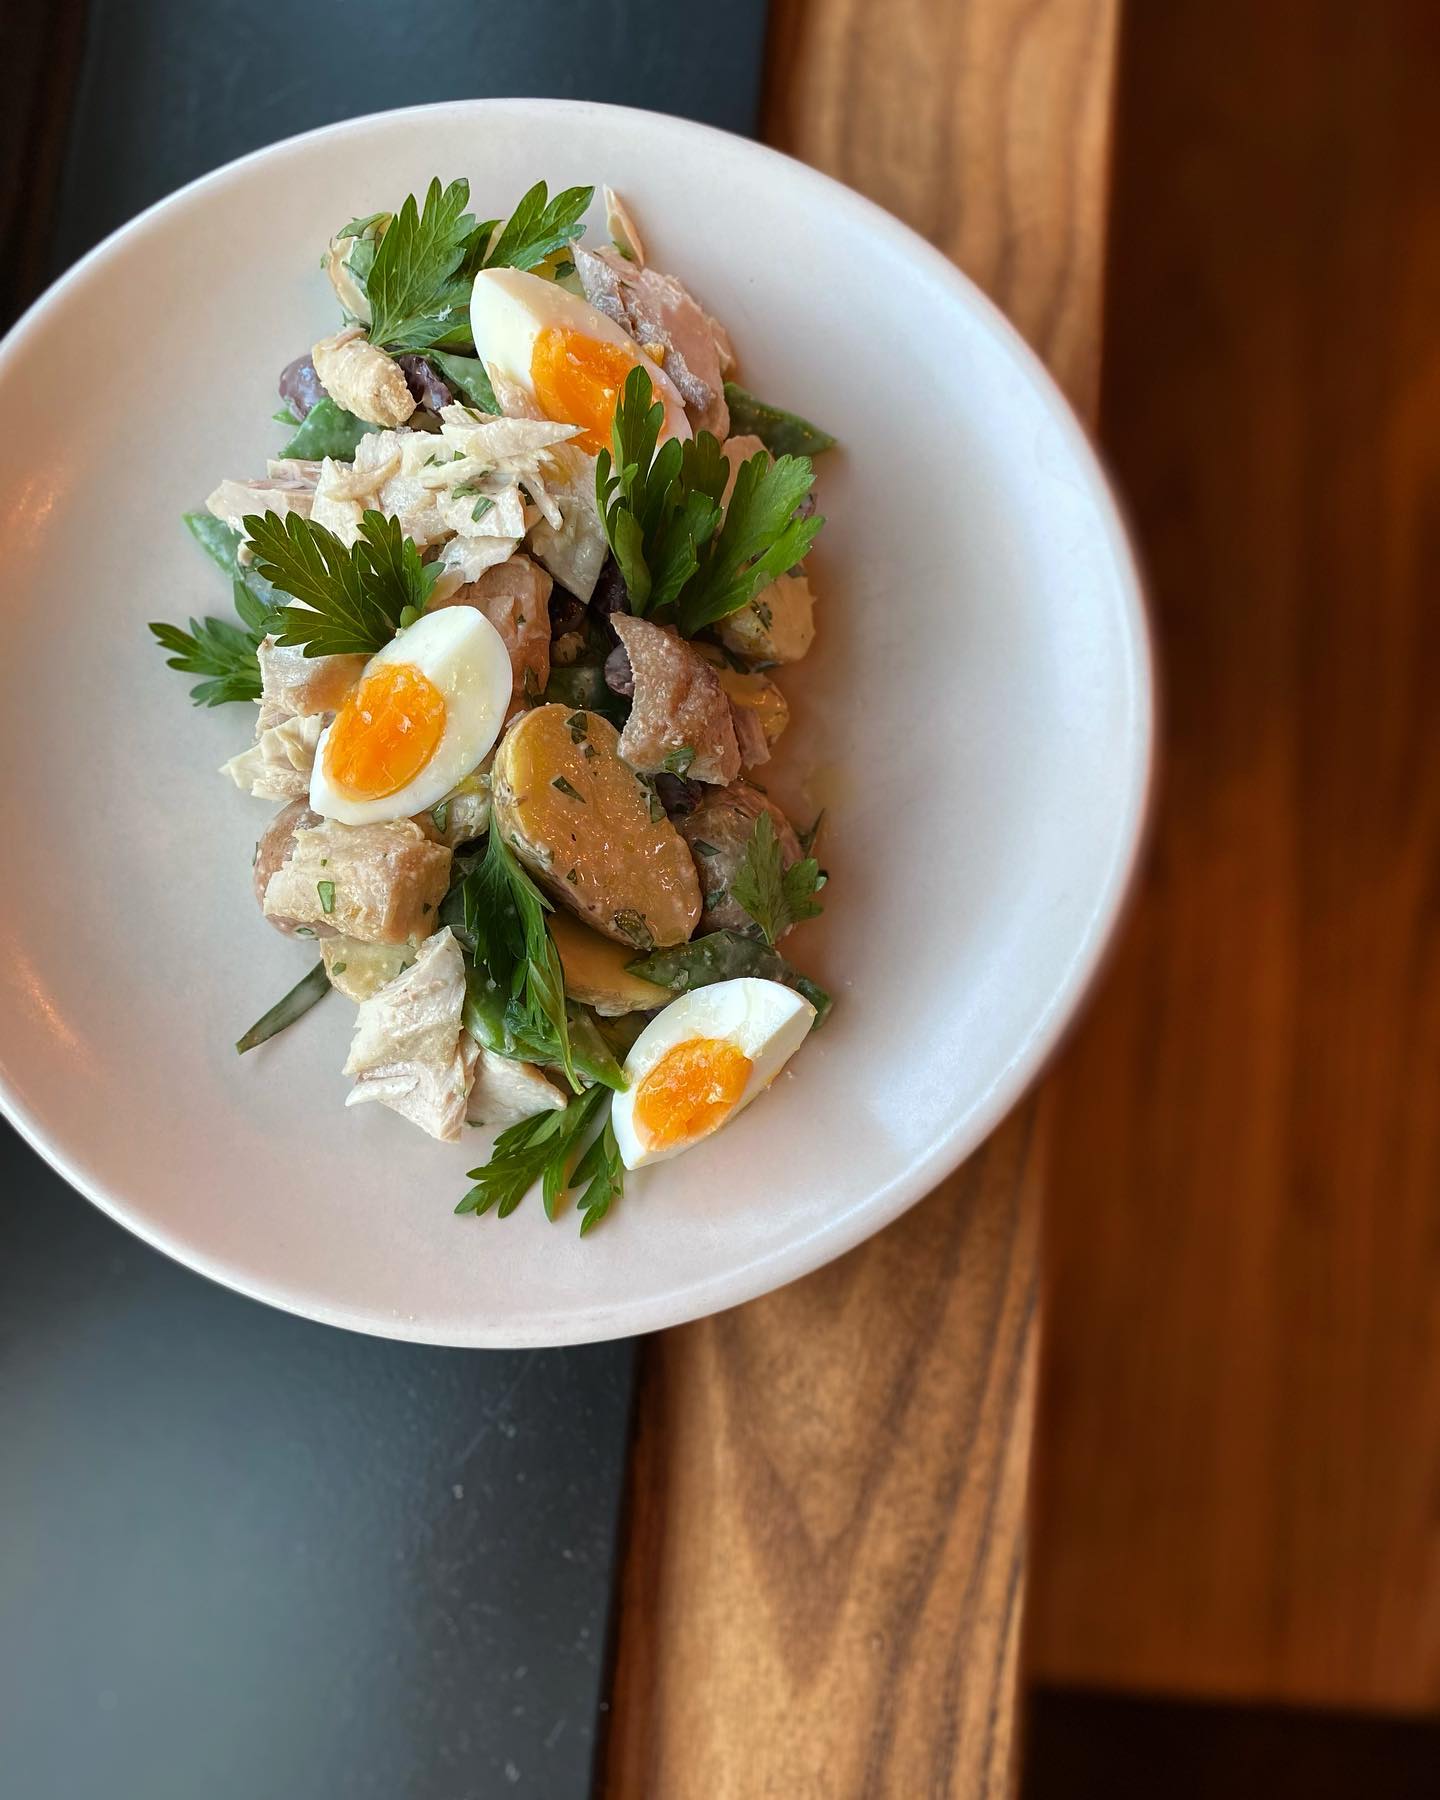 Salad Nicoise from The Redwood with Albacore confit, pinto gold potatoes, romano beans, olives, tarragon, parsley, 7-minute egg and colatura vinaigrette. (The Redwood)